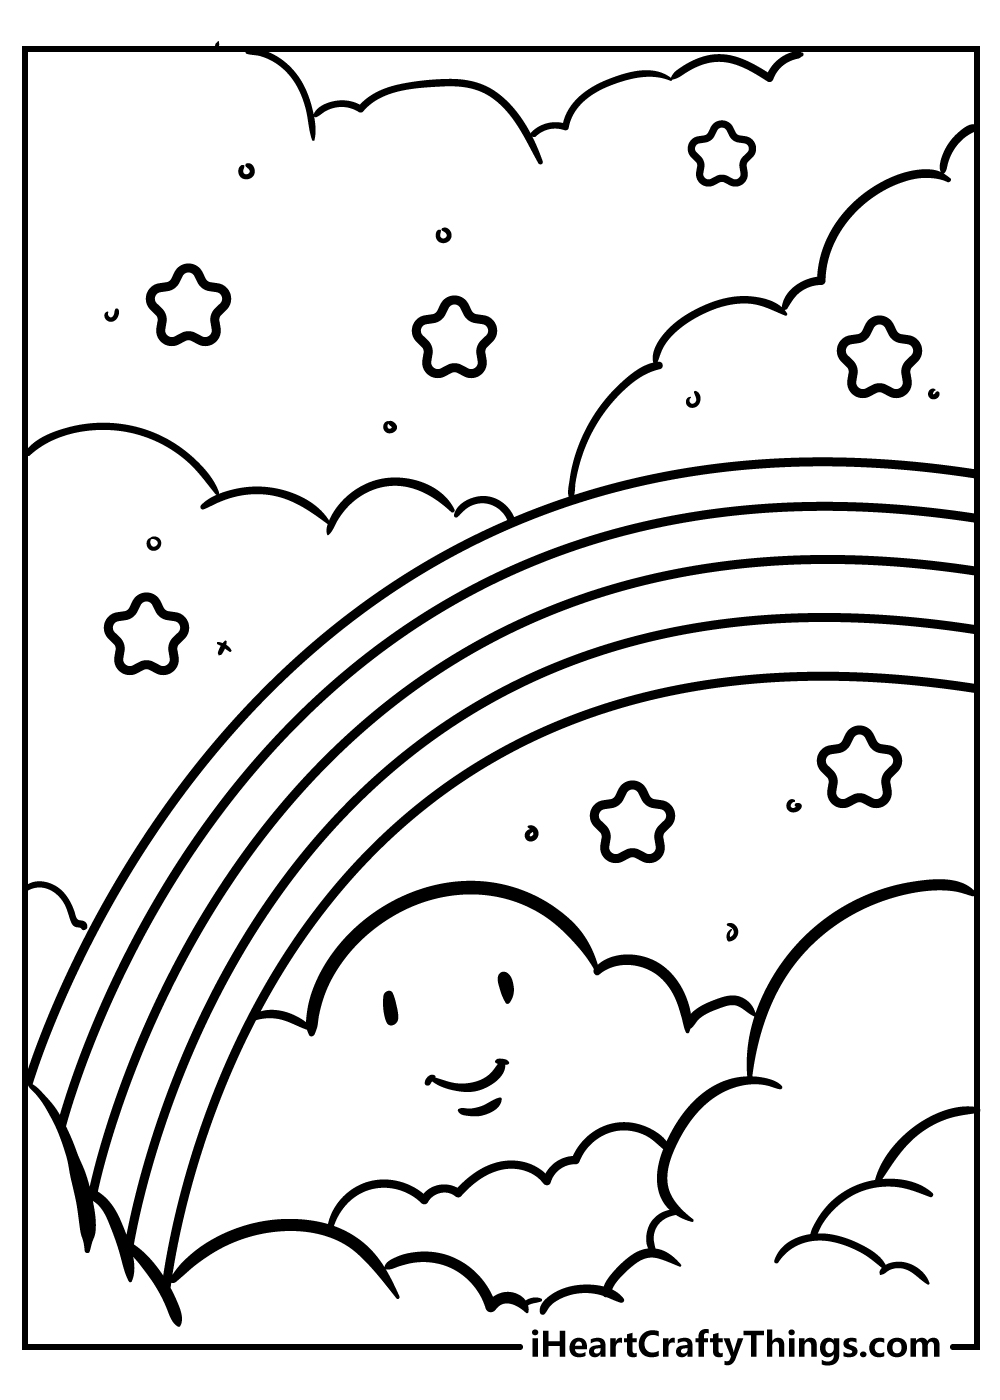 Rainbow coloring pages for kids free download